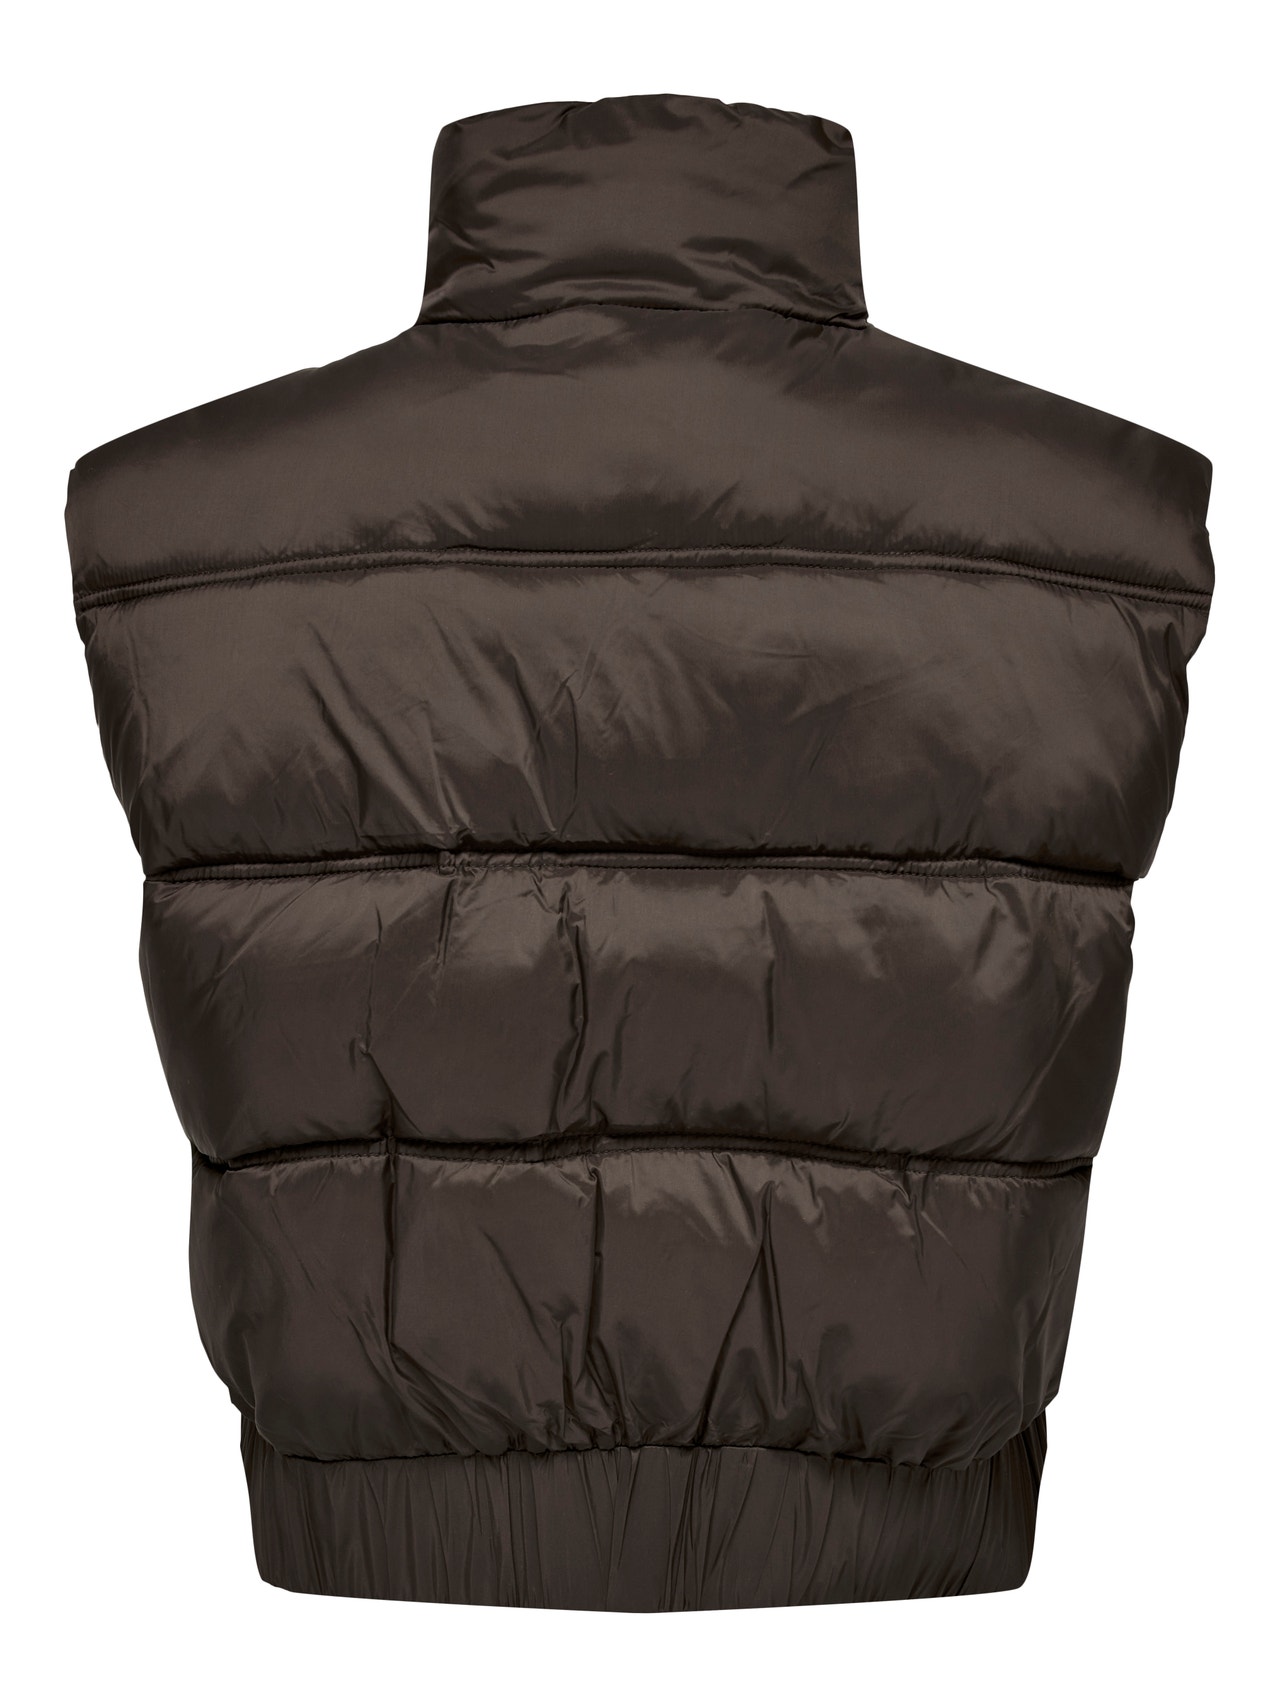 ONLY Gilets anti-froid Col haut -Hot Fudge - 15271103